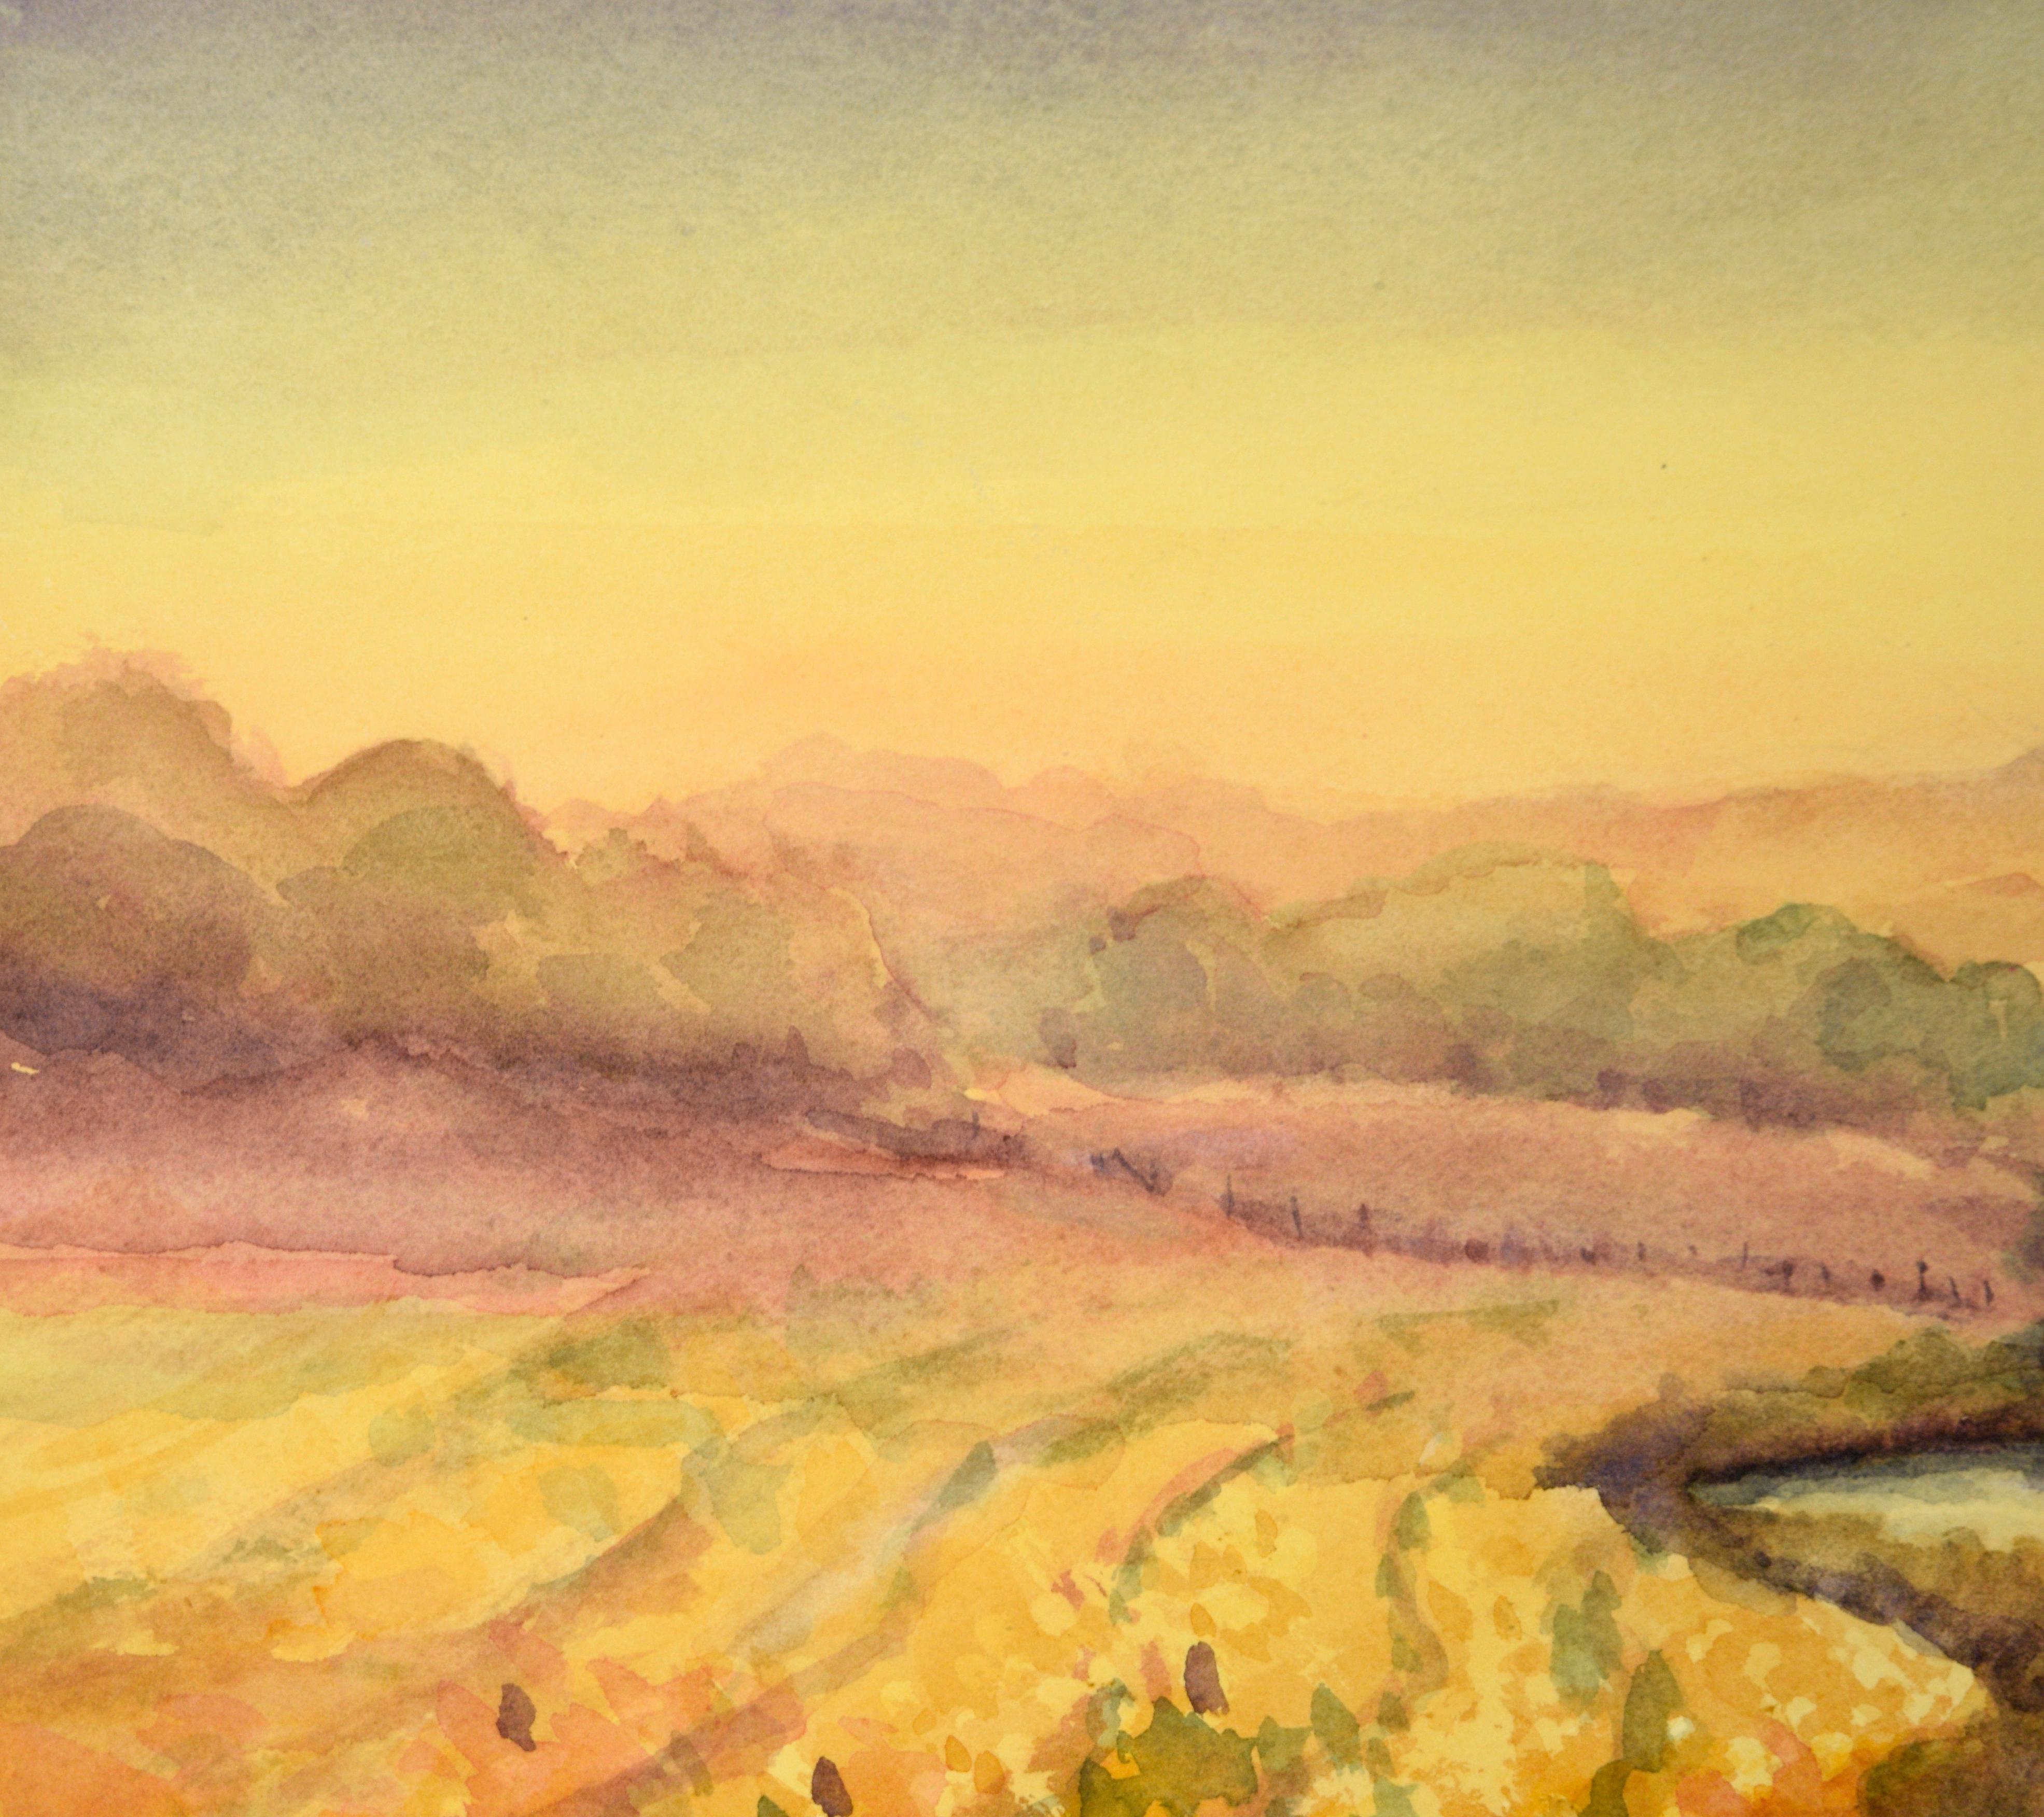 Golden Hour at the River - Watercolor Landscape on Paper - American Impressionist Art by Rosalind O'Neal